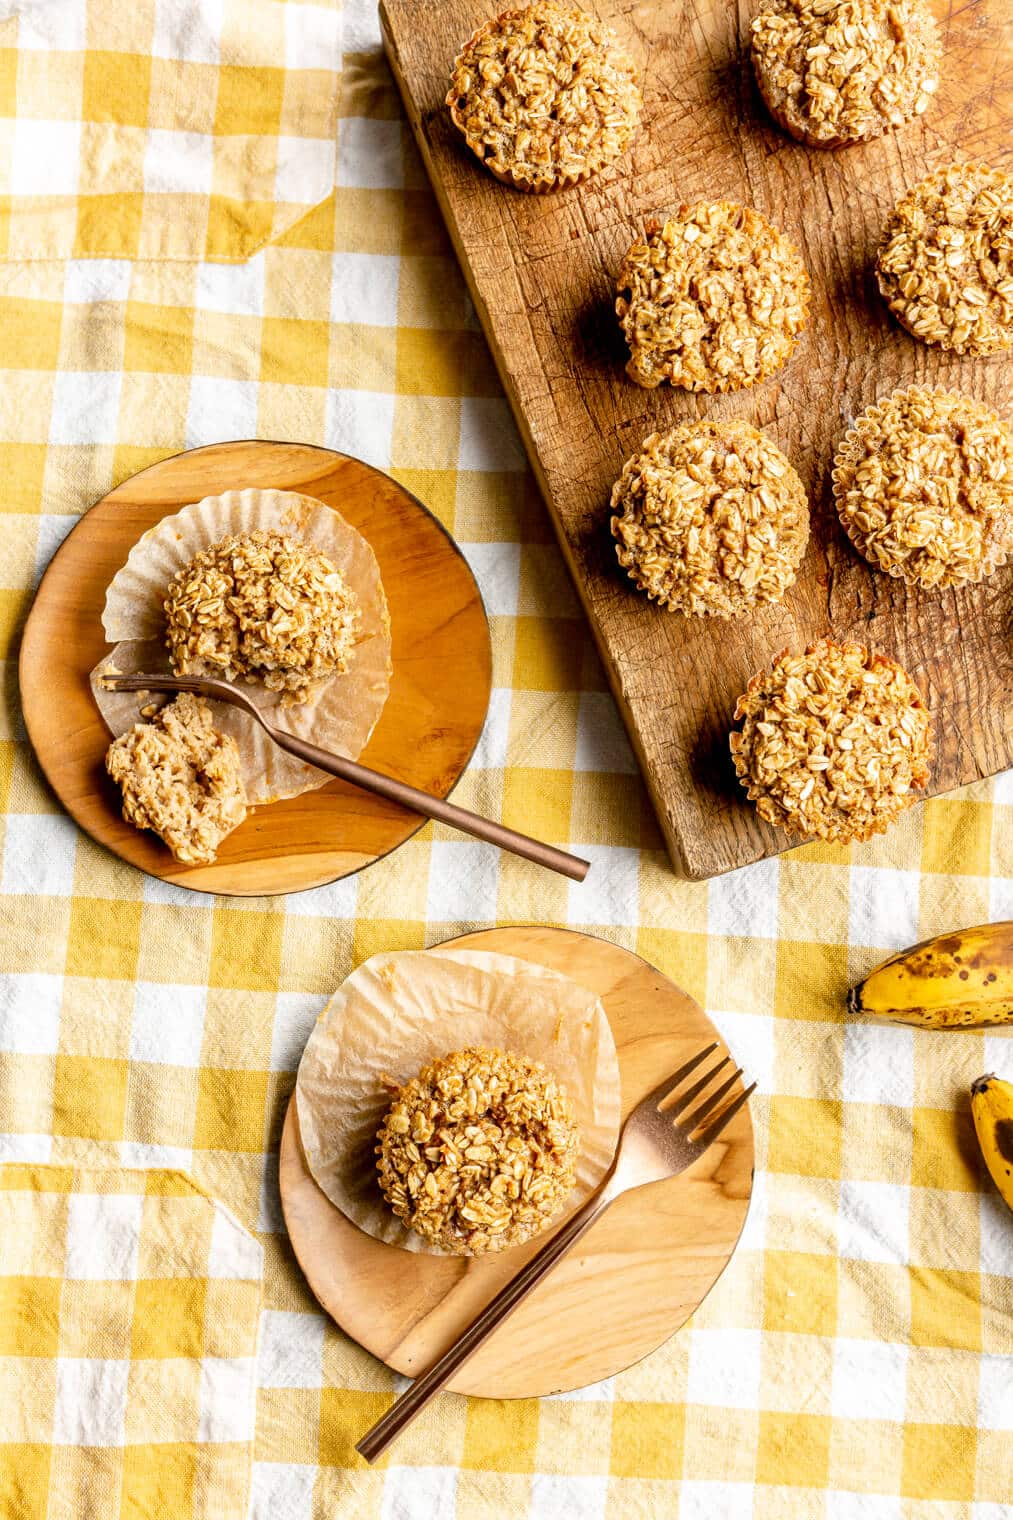 Top down view of baked oatmeal cups on a yellow and white checkered linen. There are some cups that are on a wooden cutting board and there are individually plated muffins on round, wooden plates with gold forks.